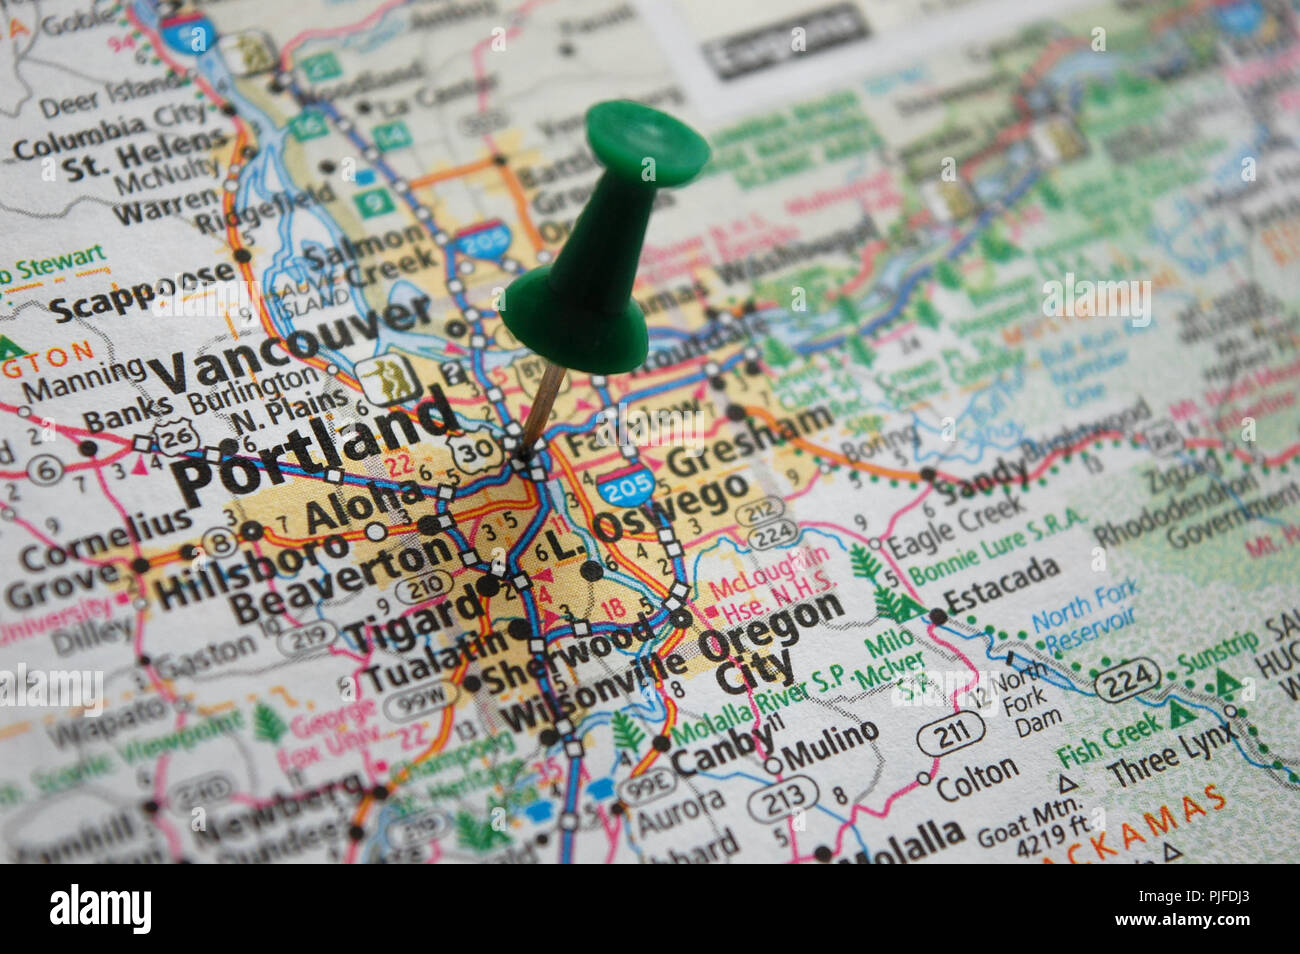 A Map Of Portland Oregon Marked With A Push Pin Stock Photo Alamy